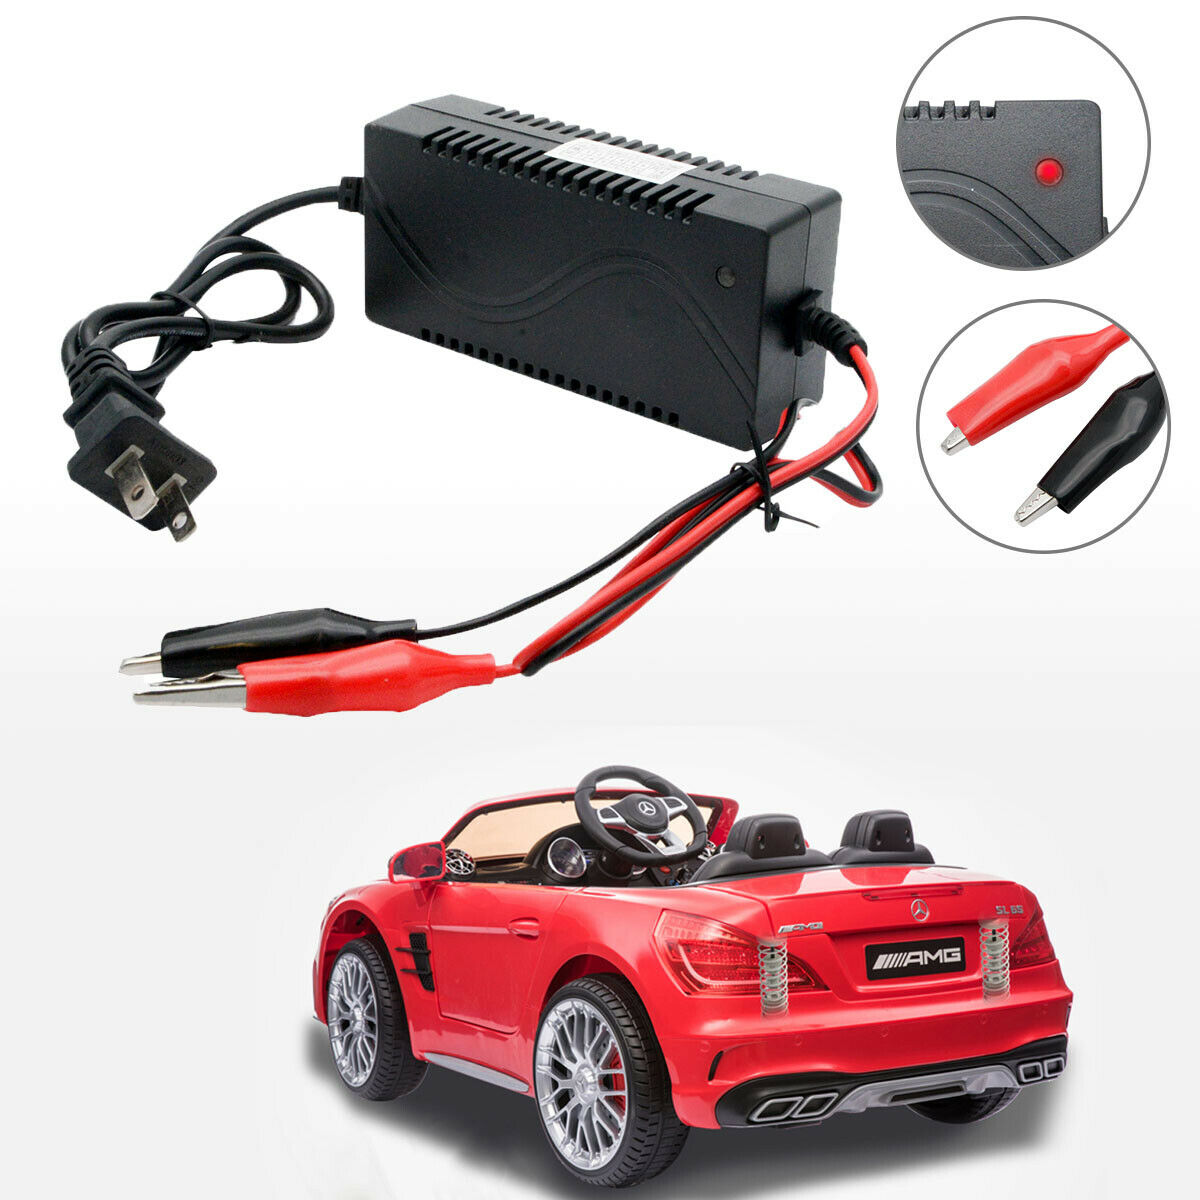 Portable 12V 1A Smart Lead Acid Battery Charger For Toy Car Motorbike Quad Bike Item specifics Cond